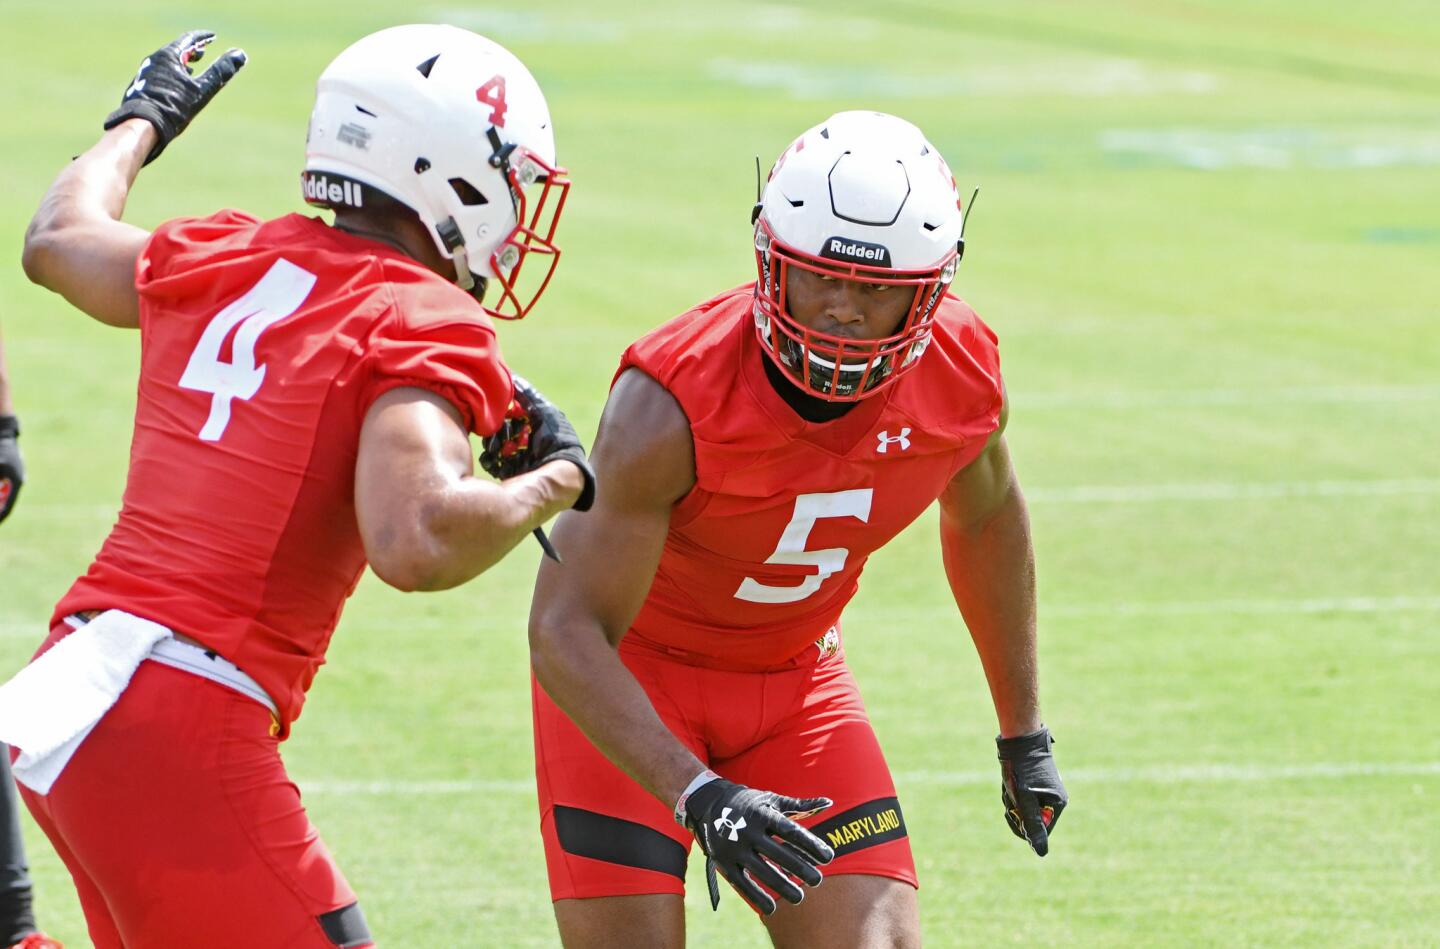 From left, Keandre Jones and Shaq Smith, University of Maryland LBs, face each other during a drill at the Terps training camp on media day.